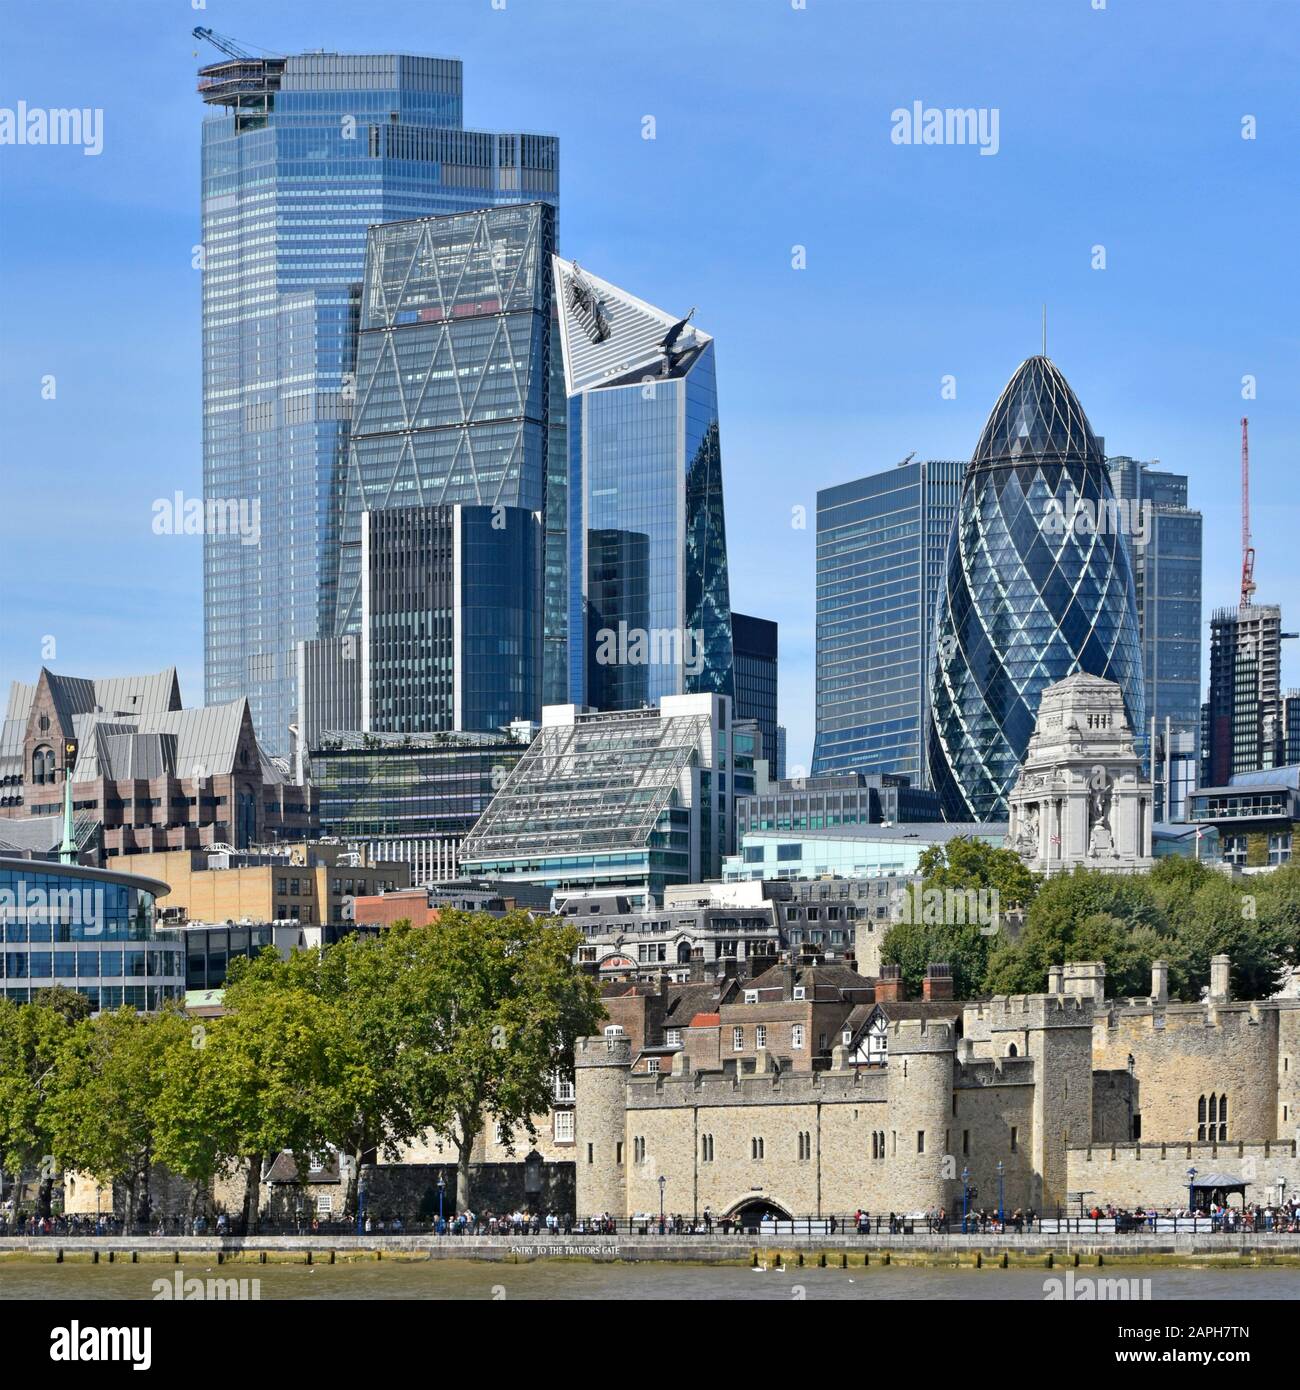 Old & new in cityscape image of skyscraper building construction 2019 in city square mile business district River Thames Tower of London England UK Stock Photo